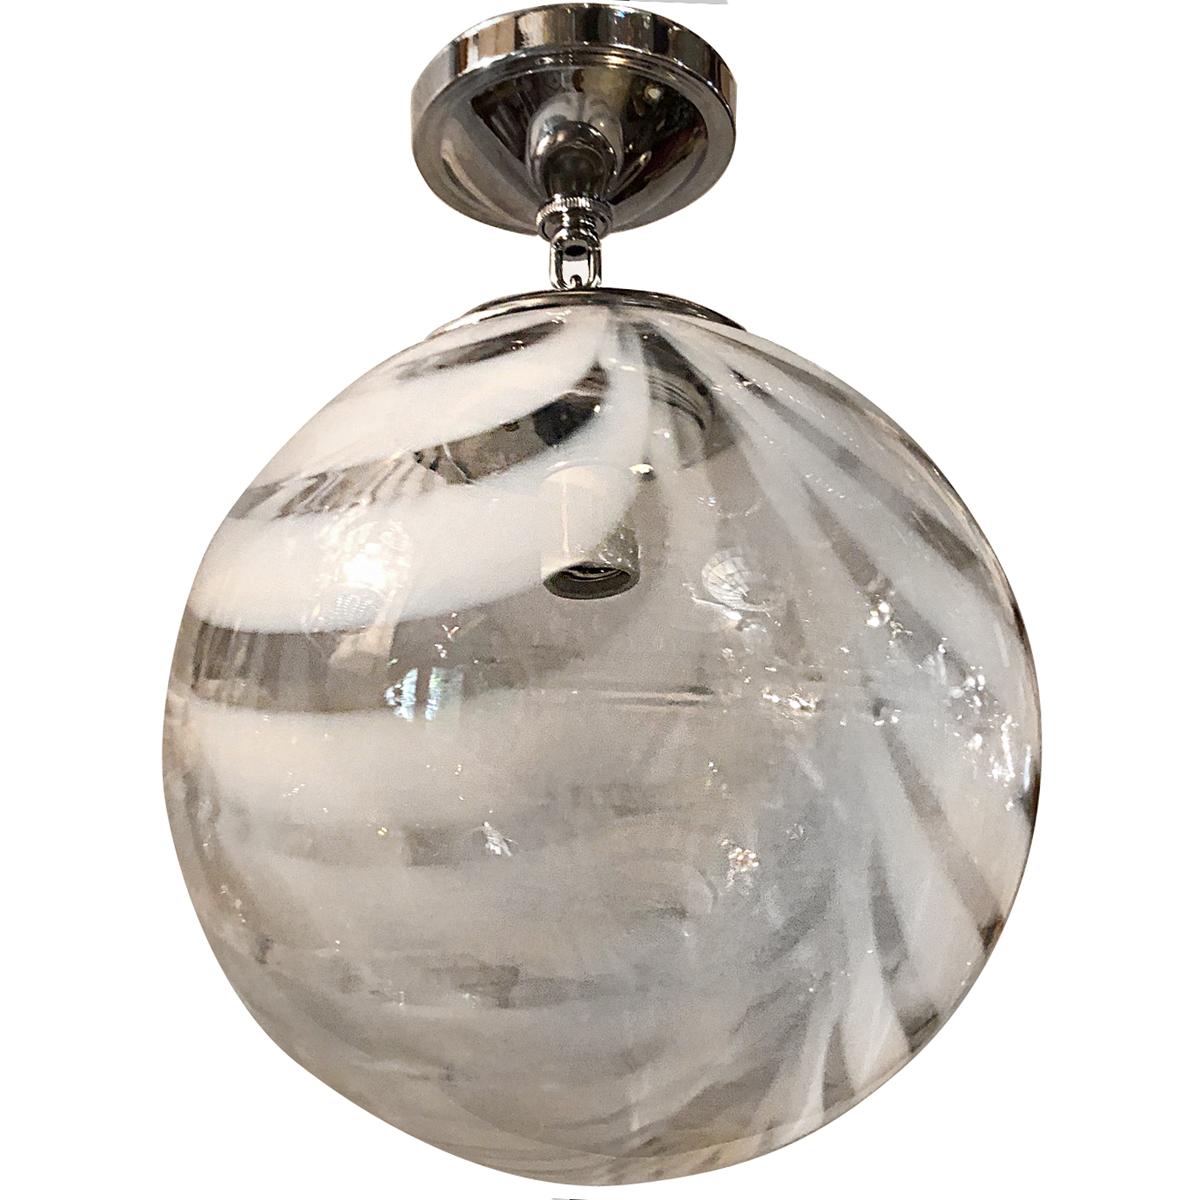 An Italian circa 1960s Moderne light fixture with white and clear ribbon glass.

Measurements:
Drop :17.5